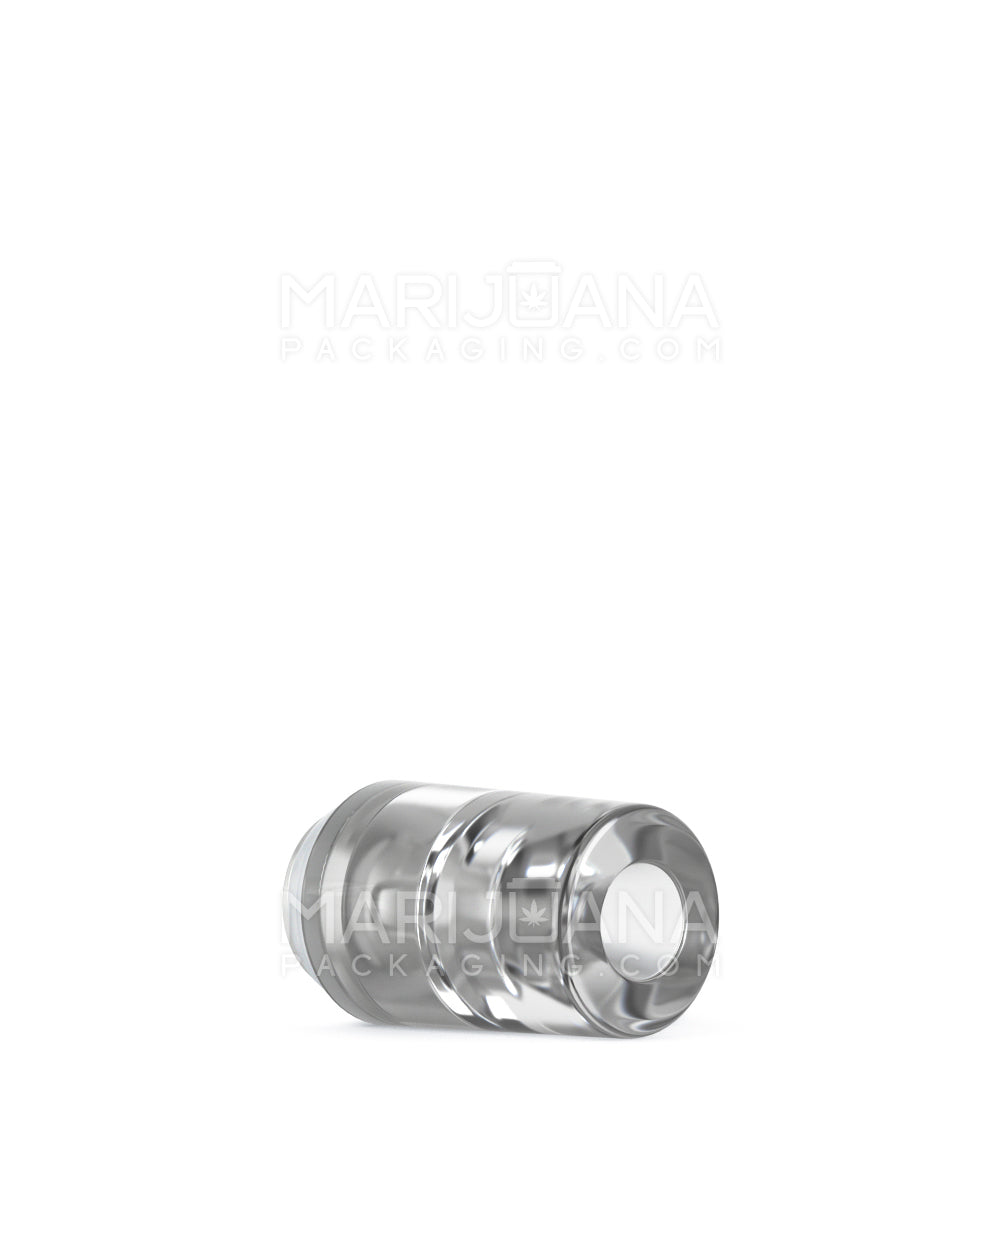 RAE | Round Vape Mouthpiece for Hand Press Plastic Cartridges | Clear Plastic - Hand Press - 400 Count